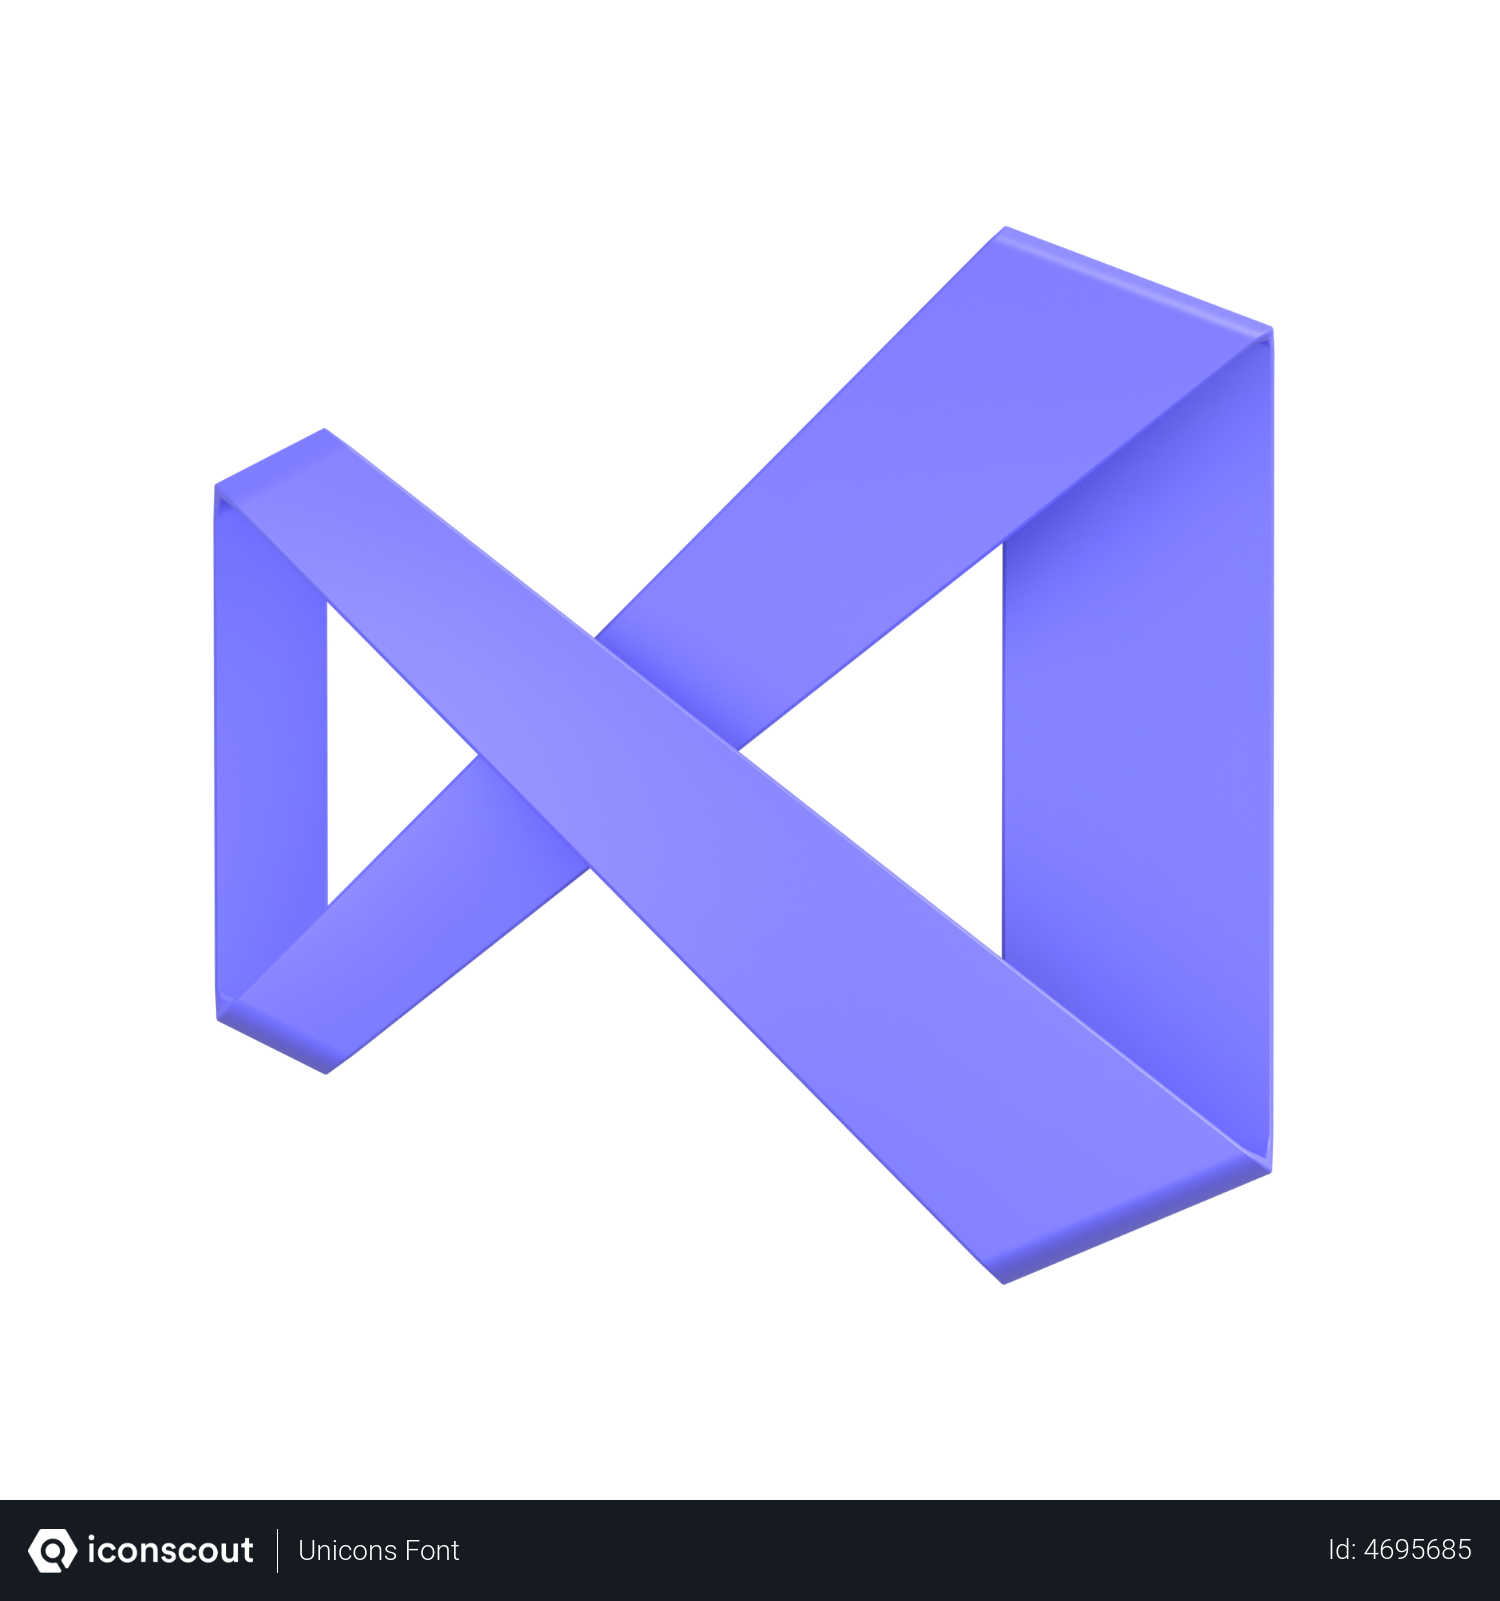 ESLint with Visual Studio Code (vscode) – Everything is going to be 200 OK